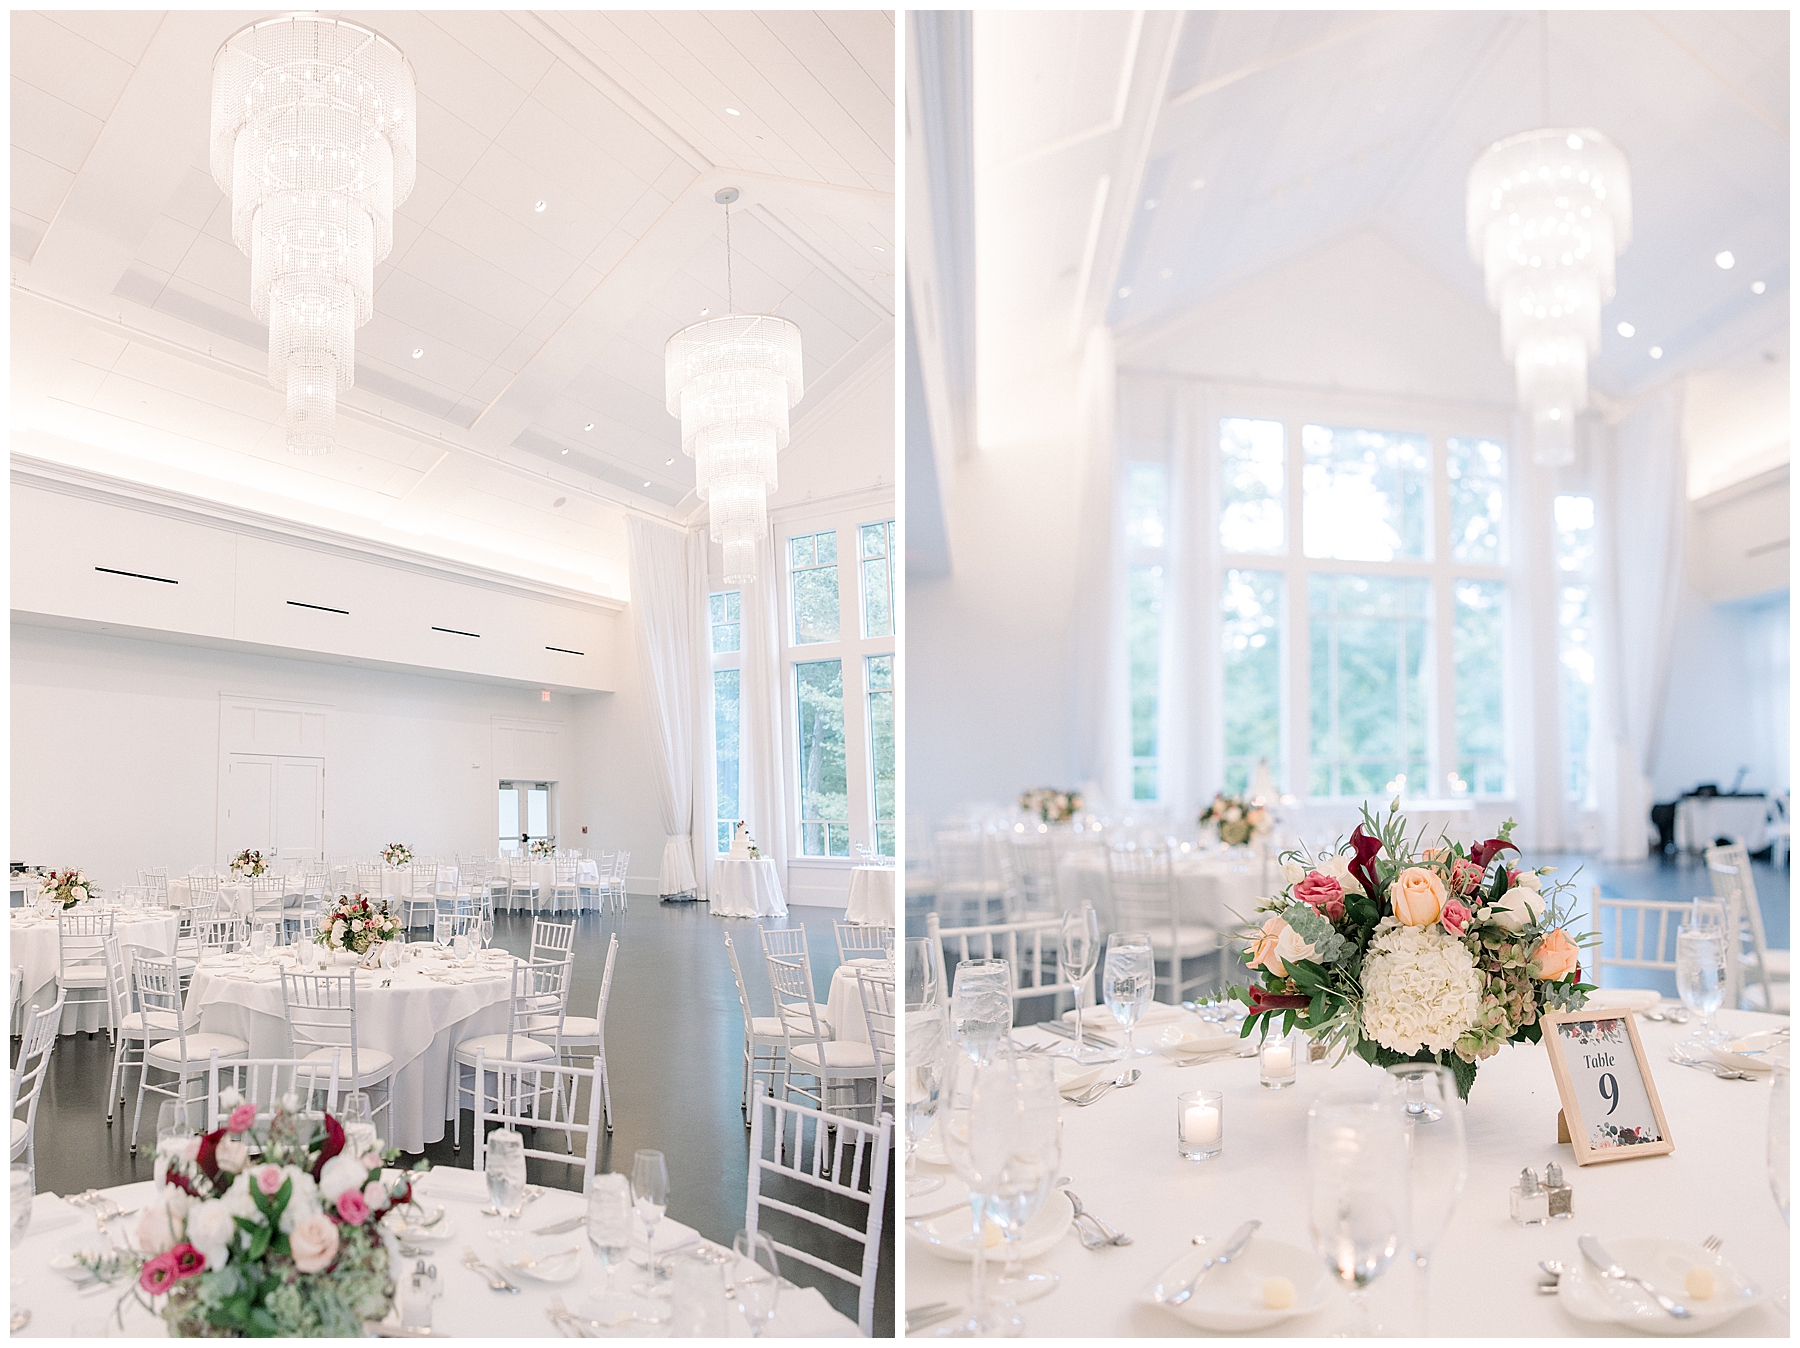 Lakeview Pavilion wedding details in MA